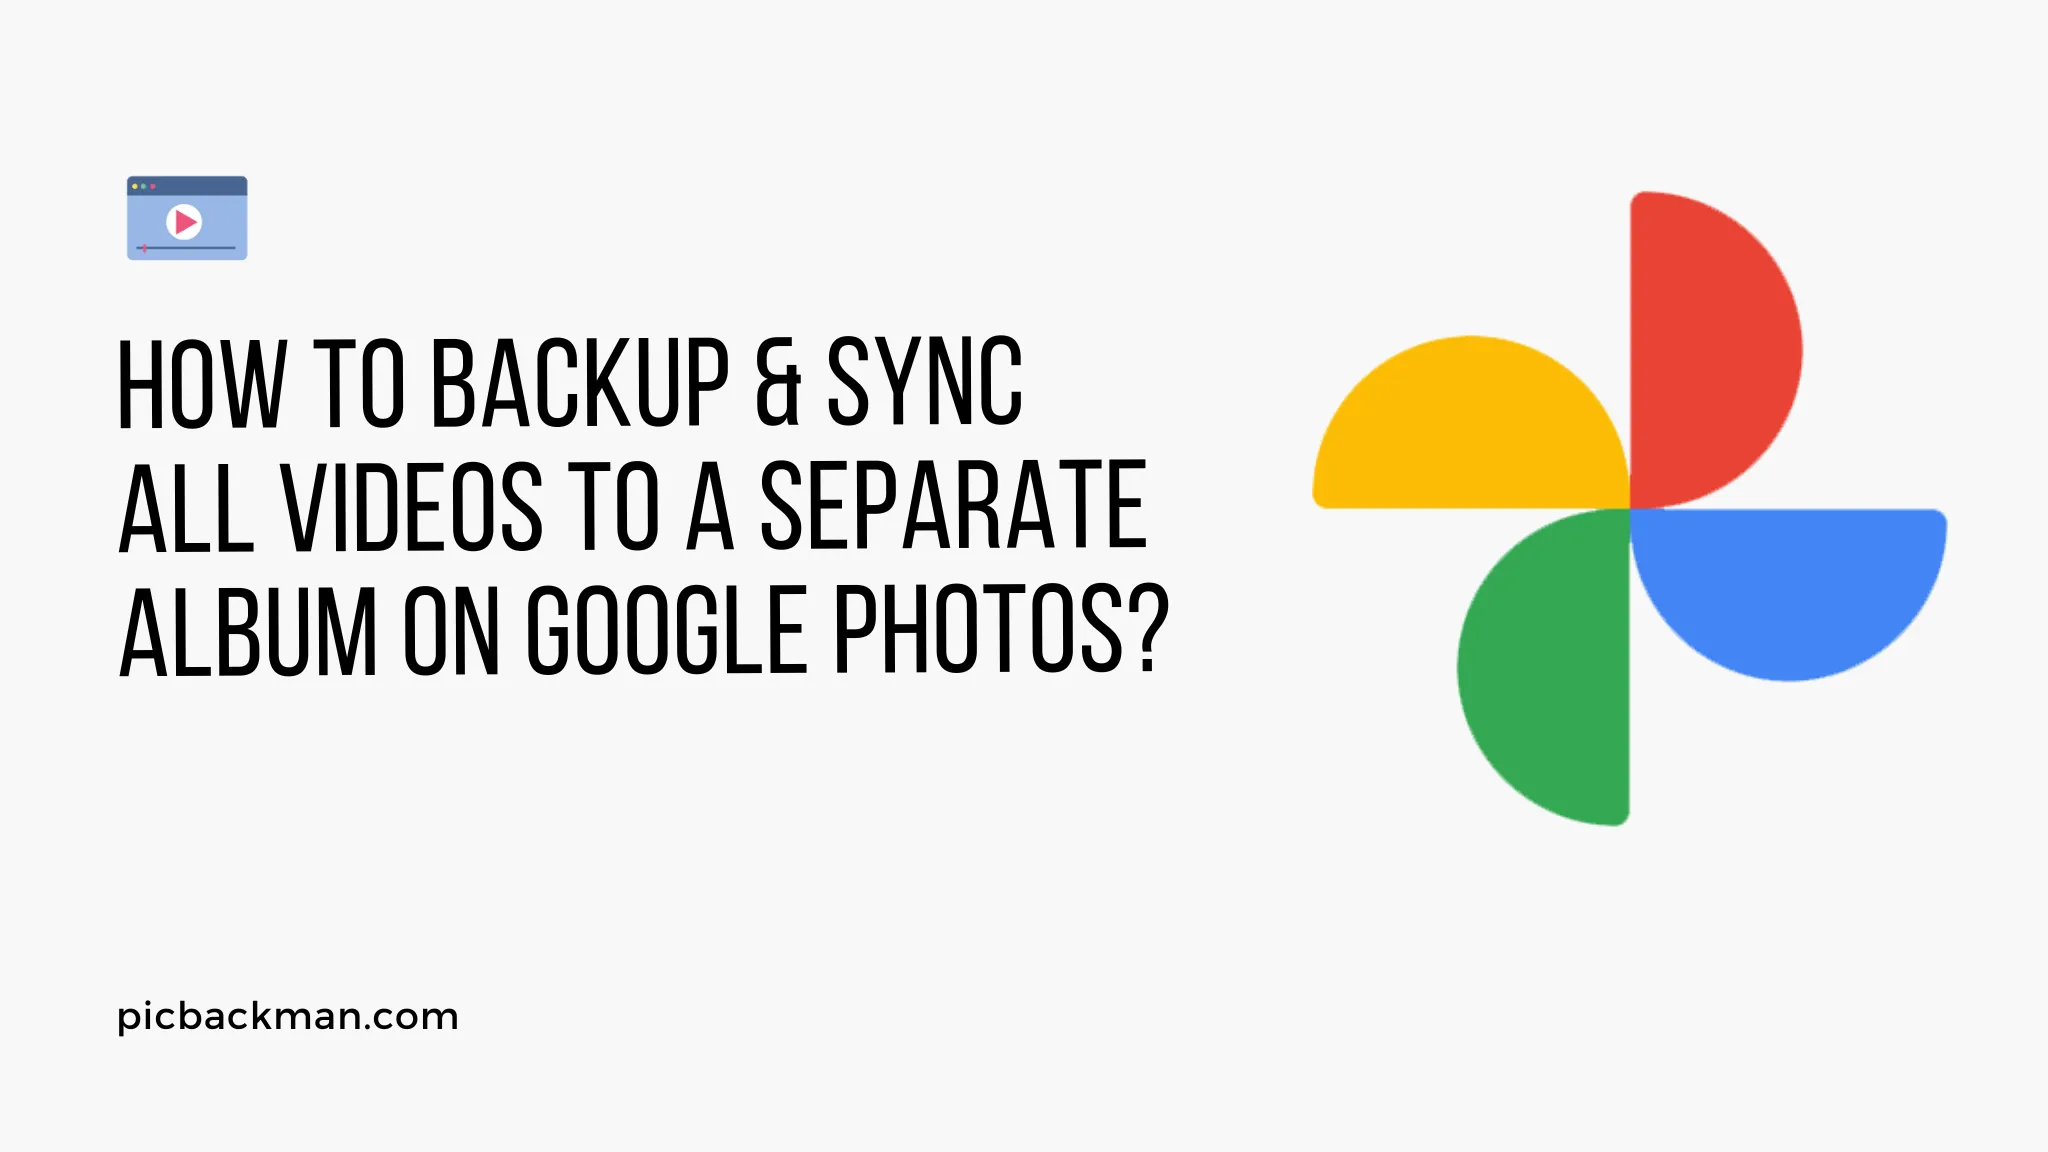 How to Backup & Sync All Videos to a Separate Album on Google Photos?